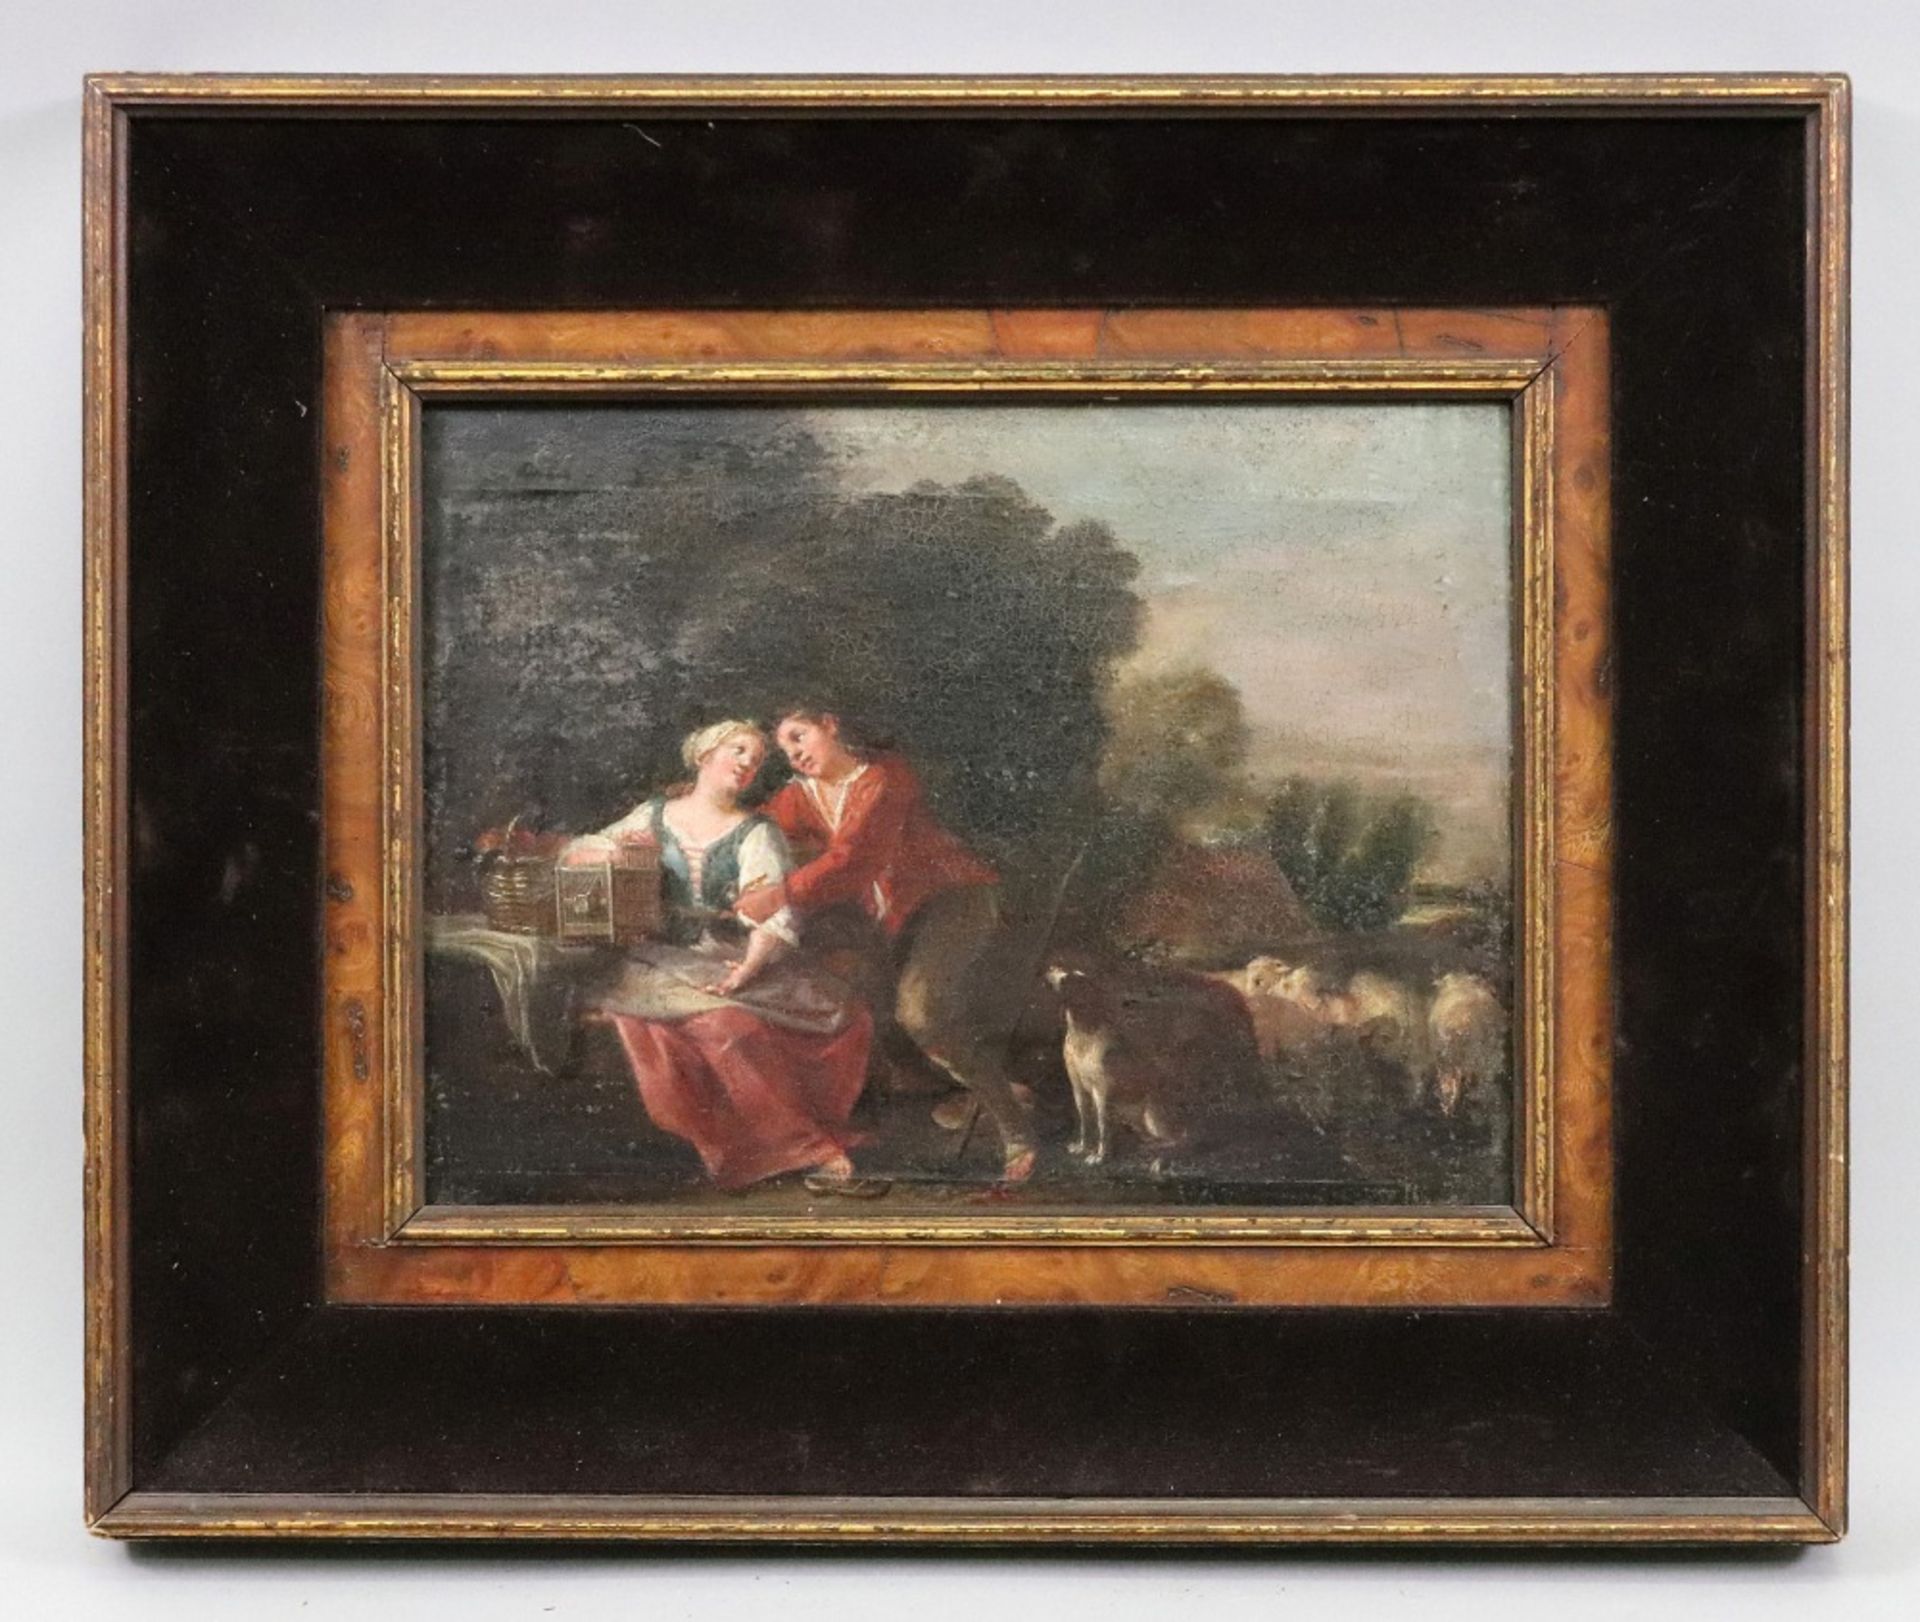 Italian school, 17th century, two lovers in a landscape, bears old label (verso), oil on panel, - Image 2 of 2